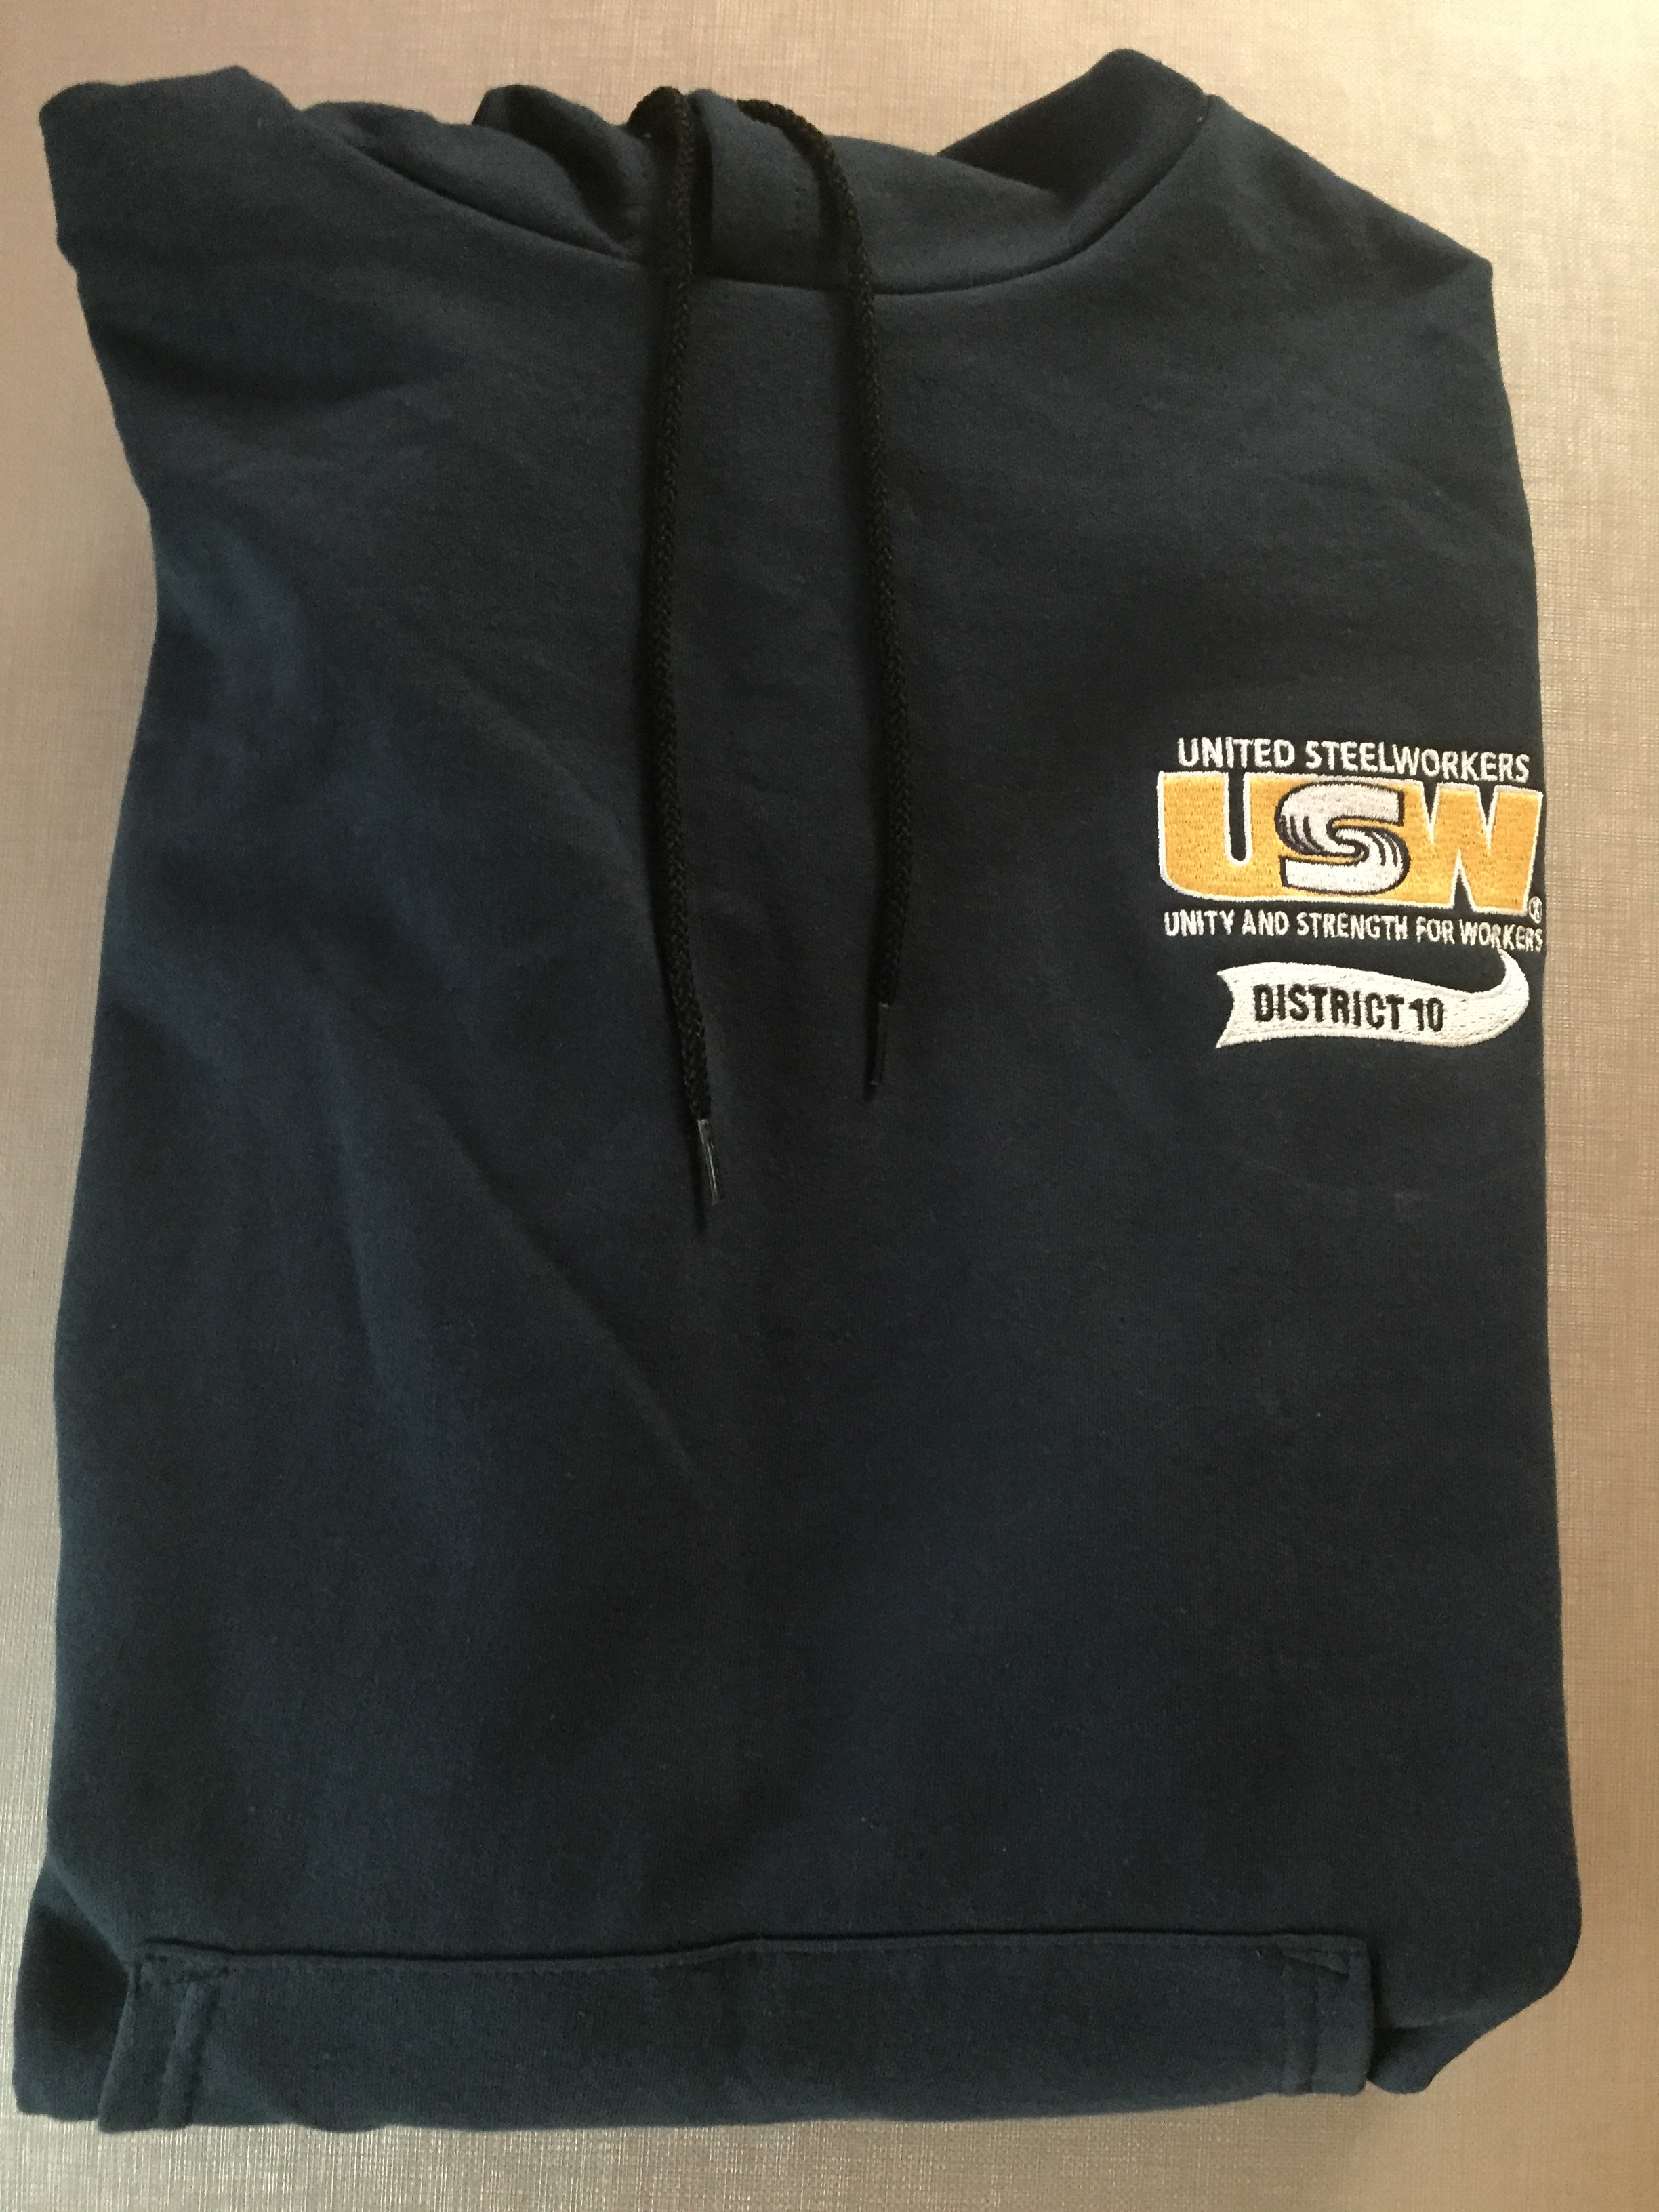 District 10 Sweatshirts for Sale: | United Steelworkers